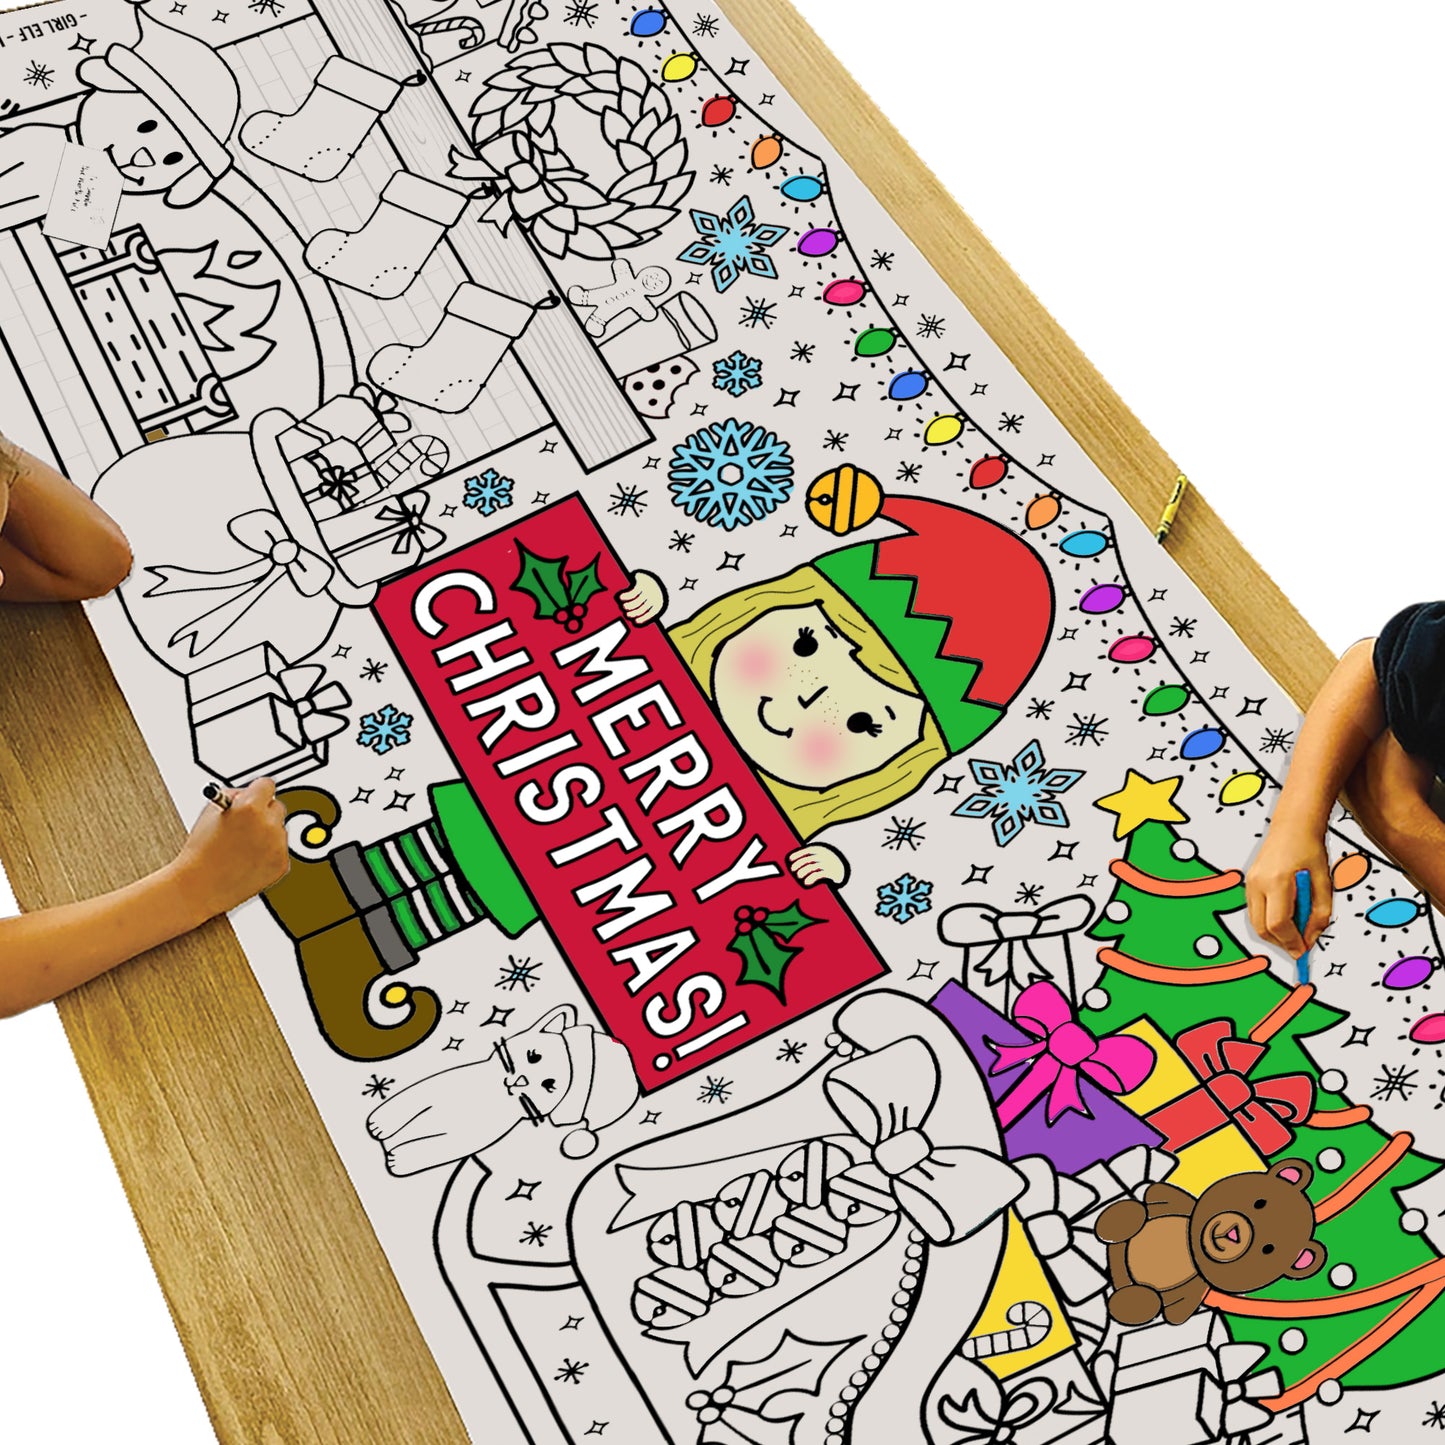 Giant Christmas Elf Coloring Banner